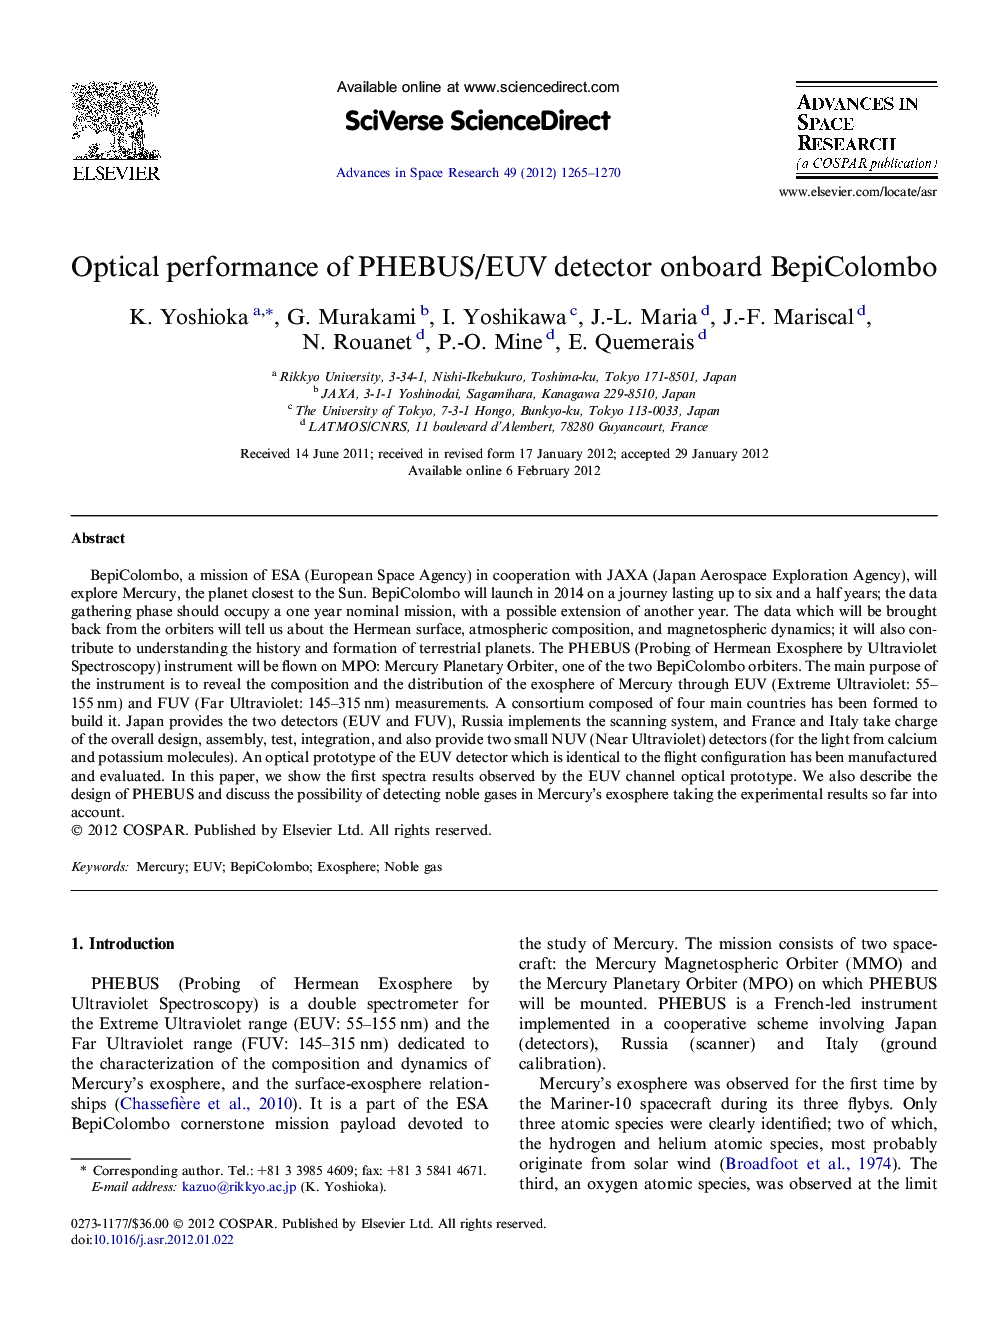 Optical performance of PHEBUS/EUV detector onboard BepiColombo